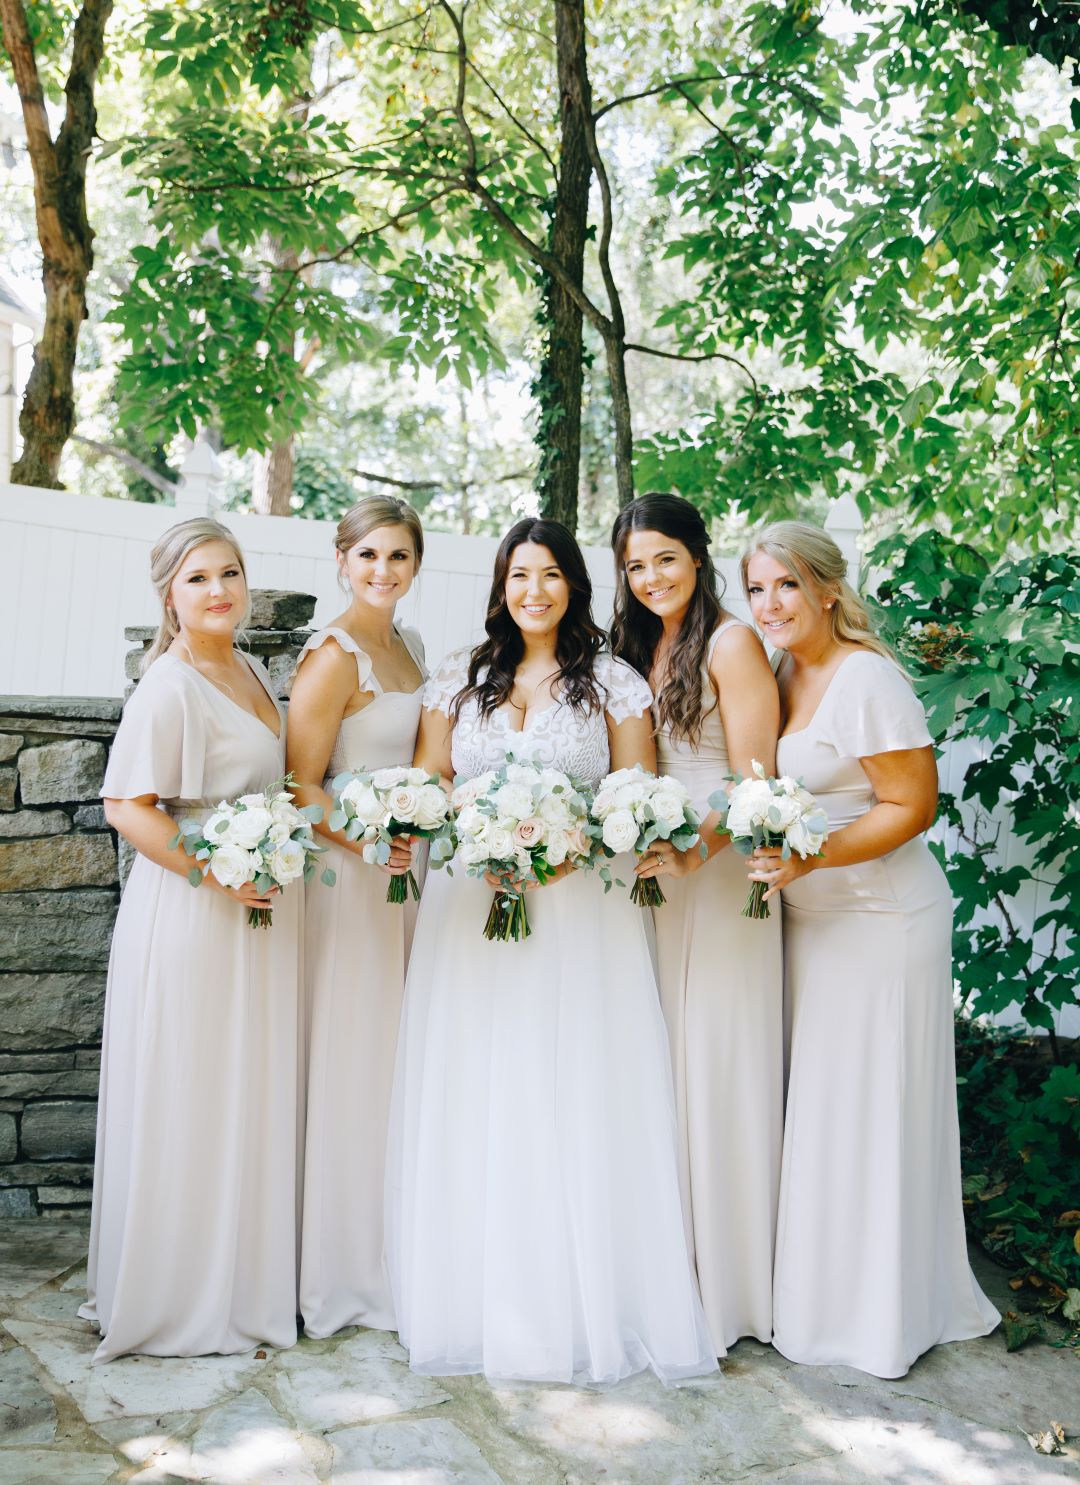 Bridal party in mismatched neutral gown styles with rose bouquets earthy summer garden wedding in September, neutrals & greenery